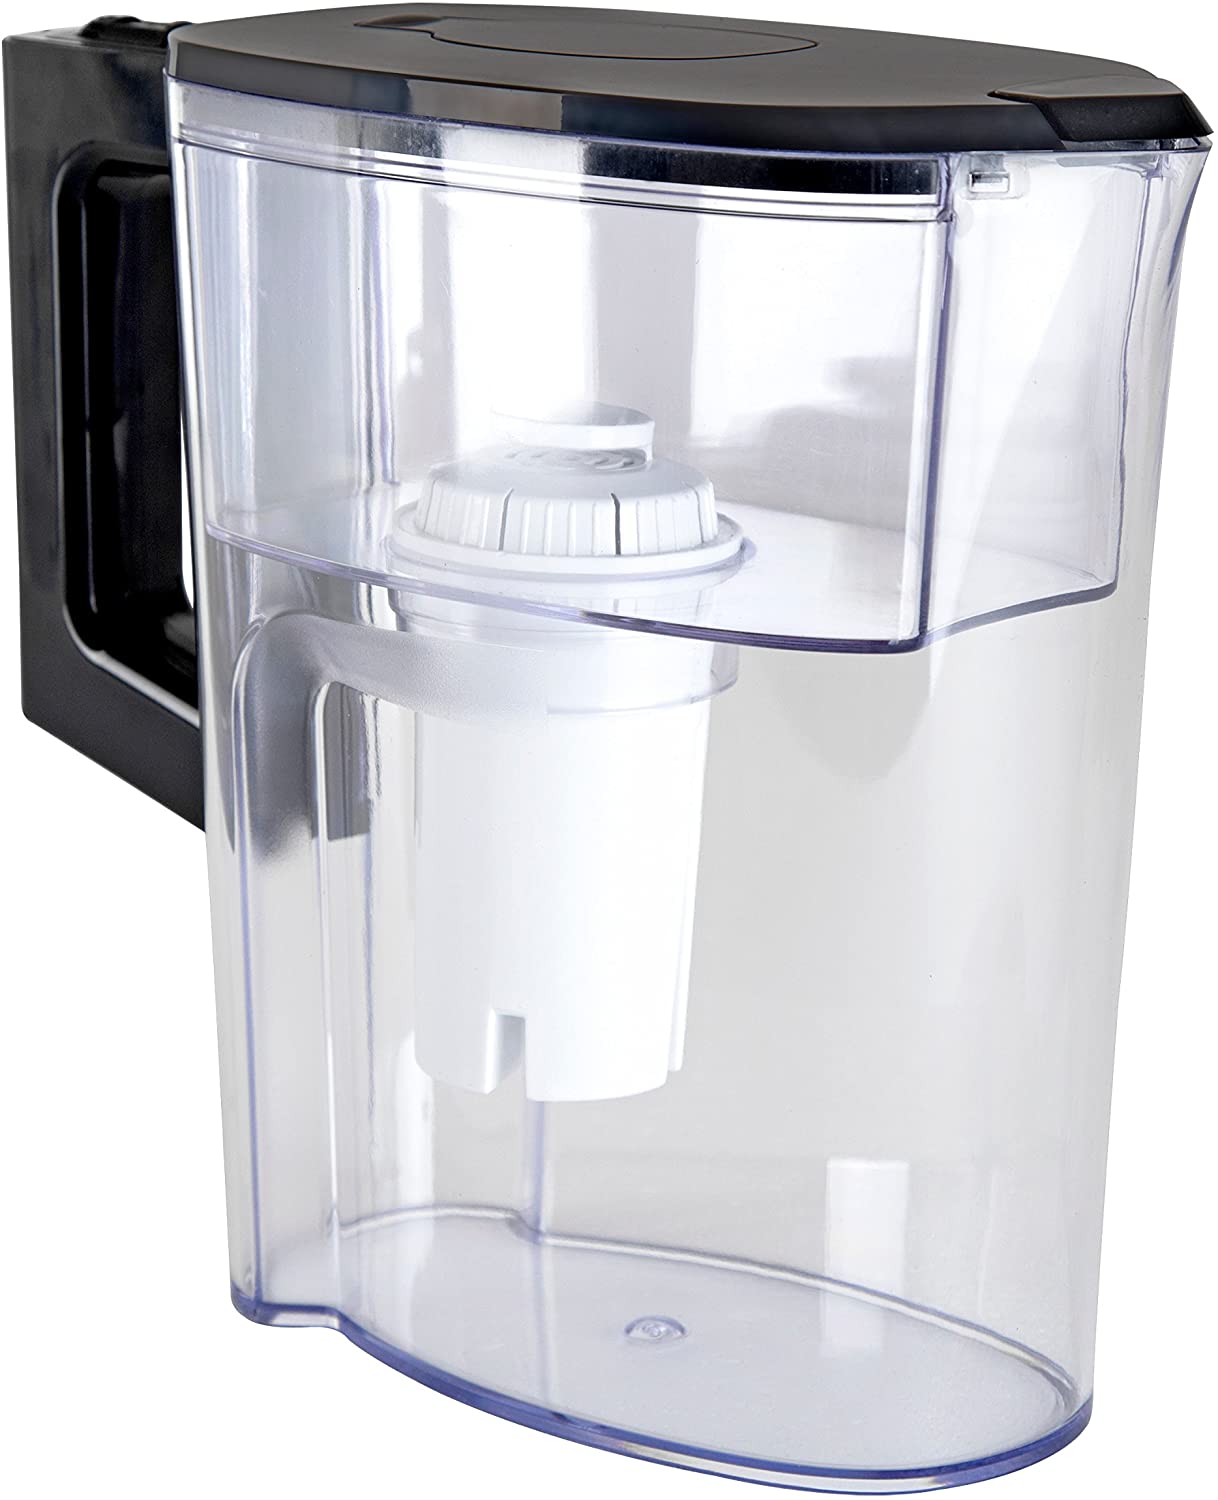 6 Cup Filtration water pitcher, Pack of 1, Clear | Decor Gifts and More